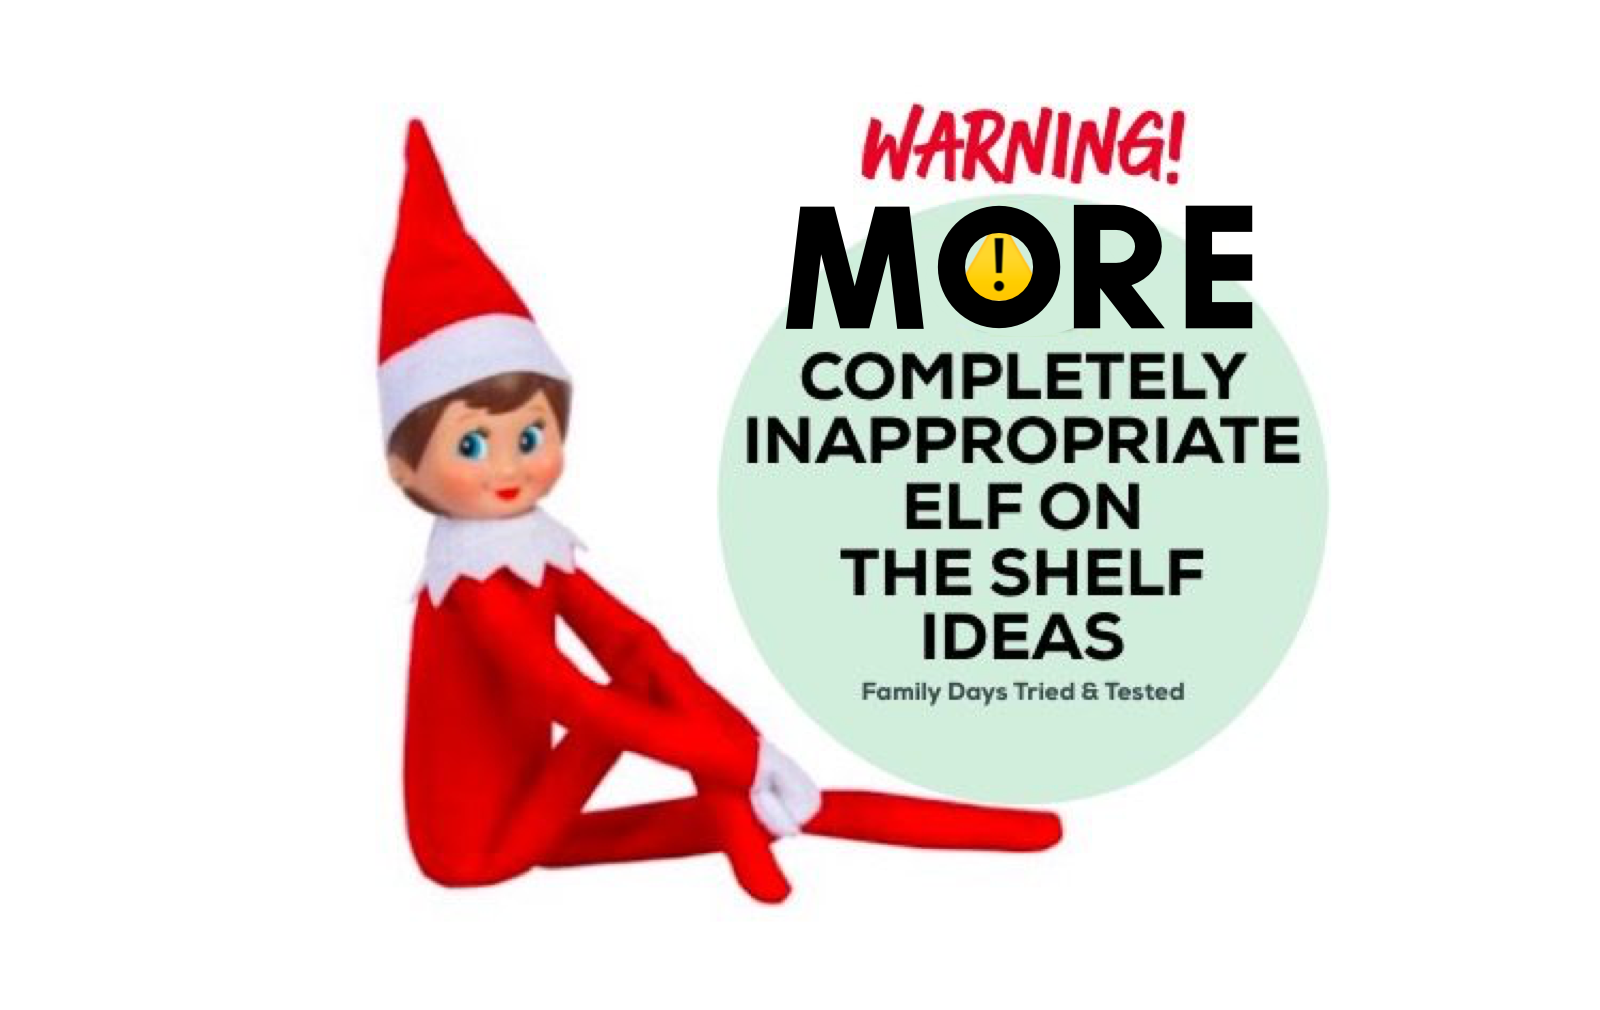 Inappropriate elf on a shelf memes